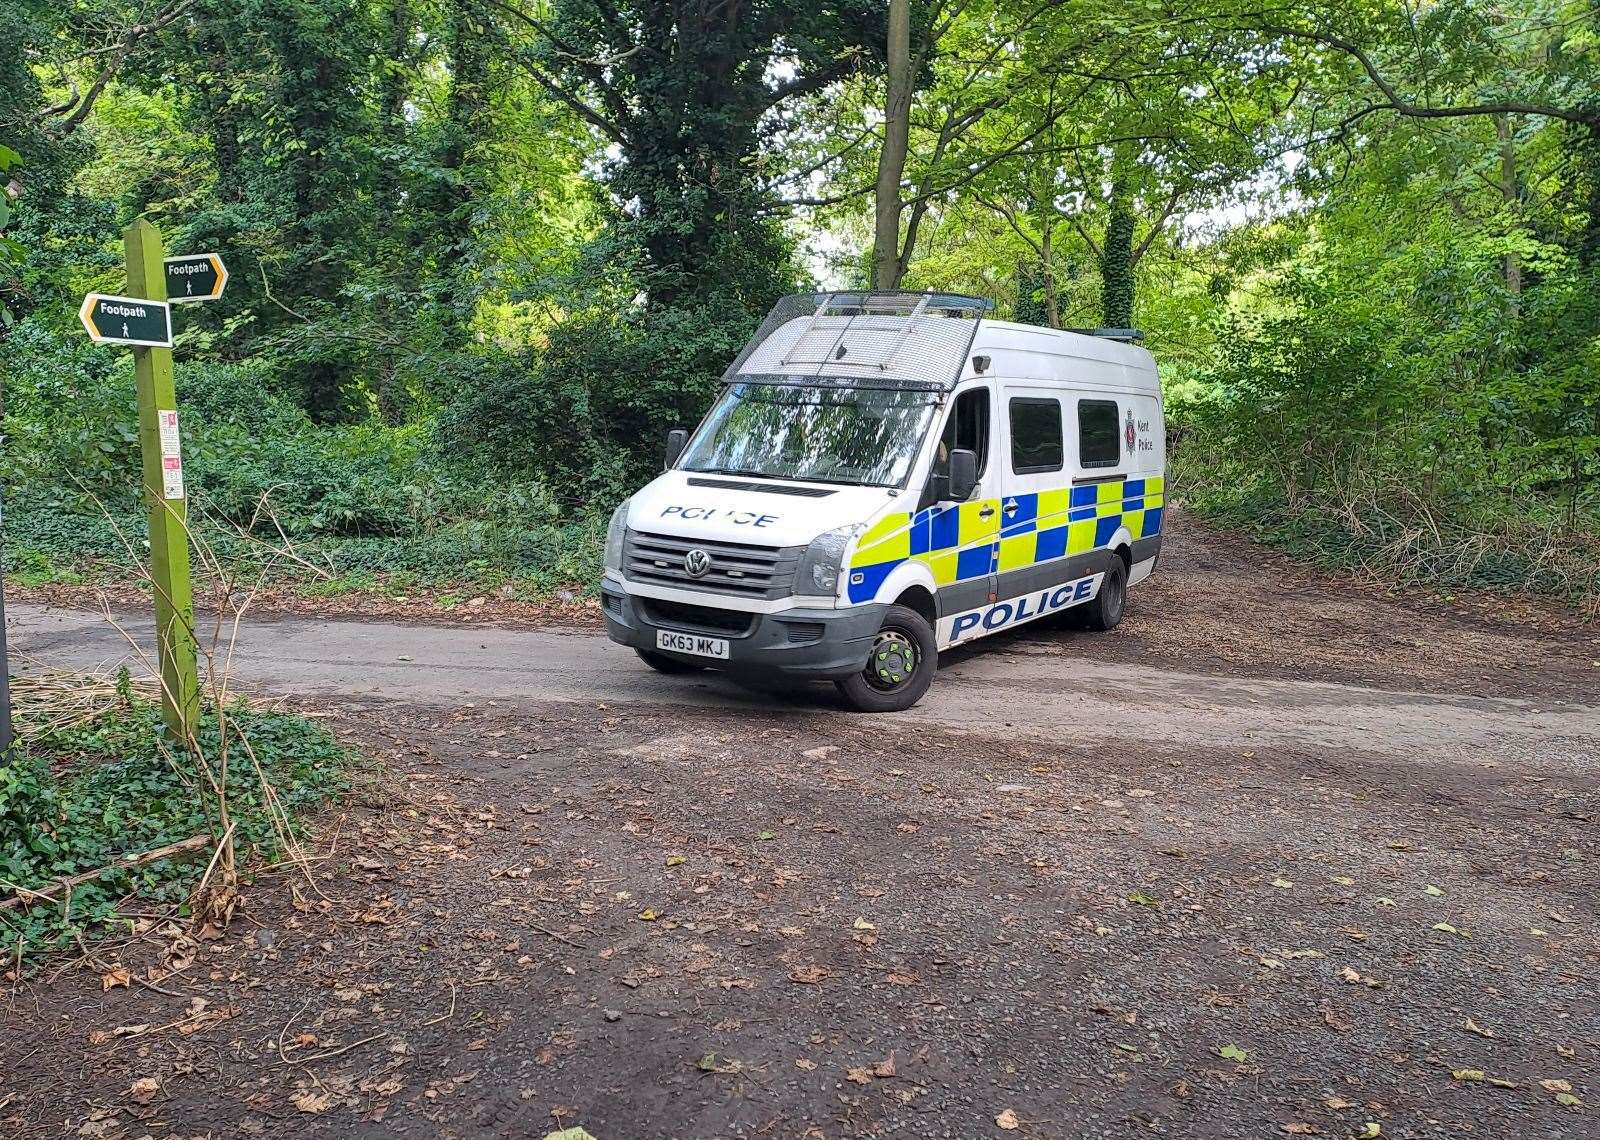 Police have been seen in Shuart Lane – a rural road in St Nicholas At Wade – where Claire Knight's Suzuki was found